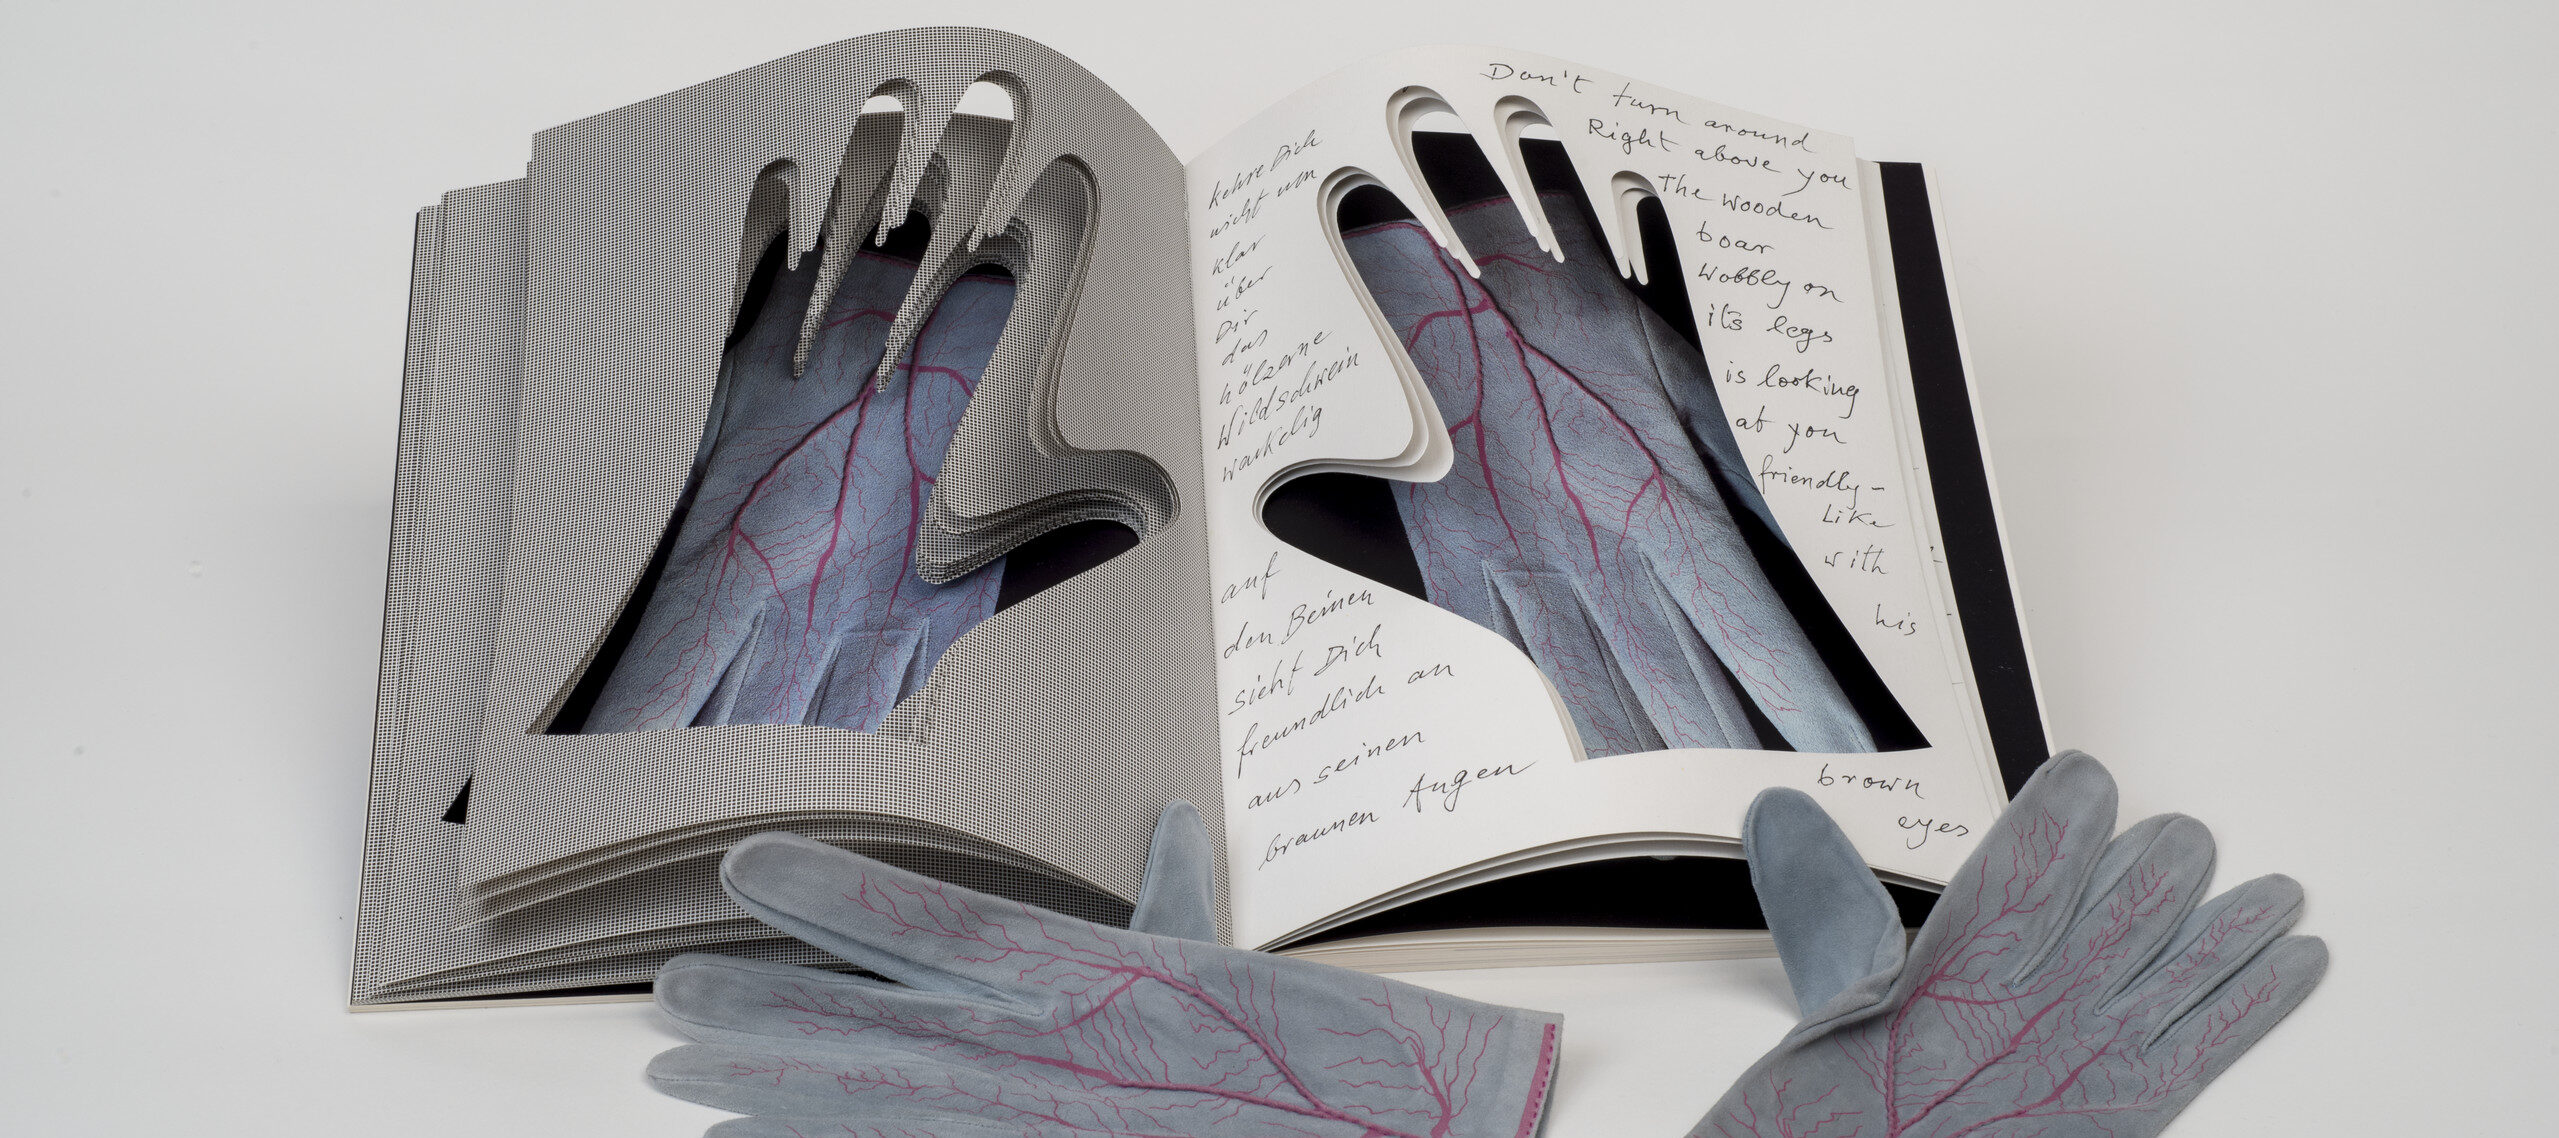 An open book into whose pages the shapes of hands have been cut. Gray gloves painted with red veins are visible through the cutouts. An identical pair of gloves rest next to the book.